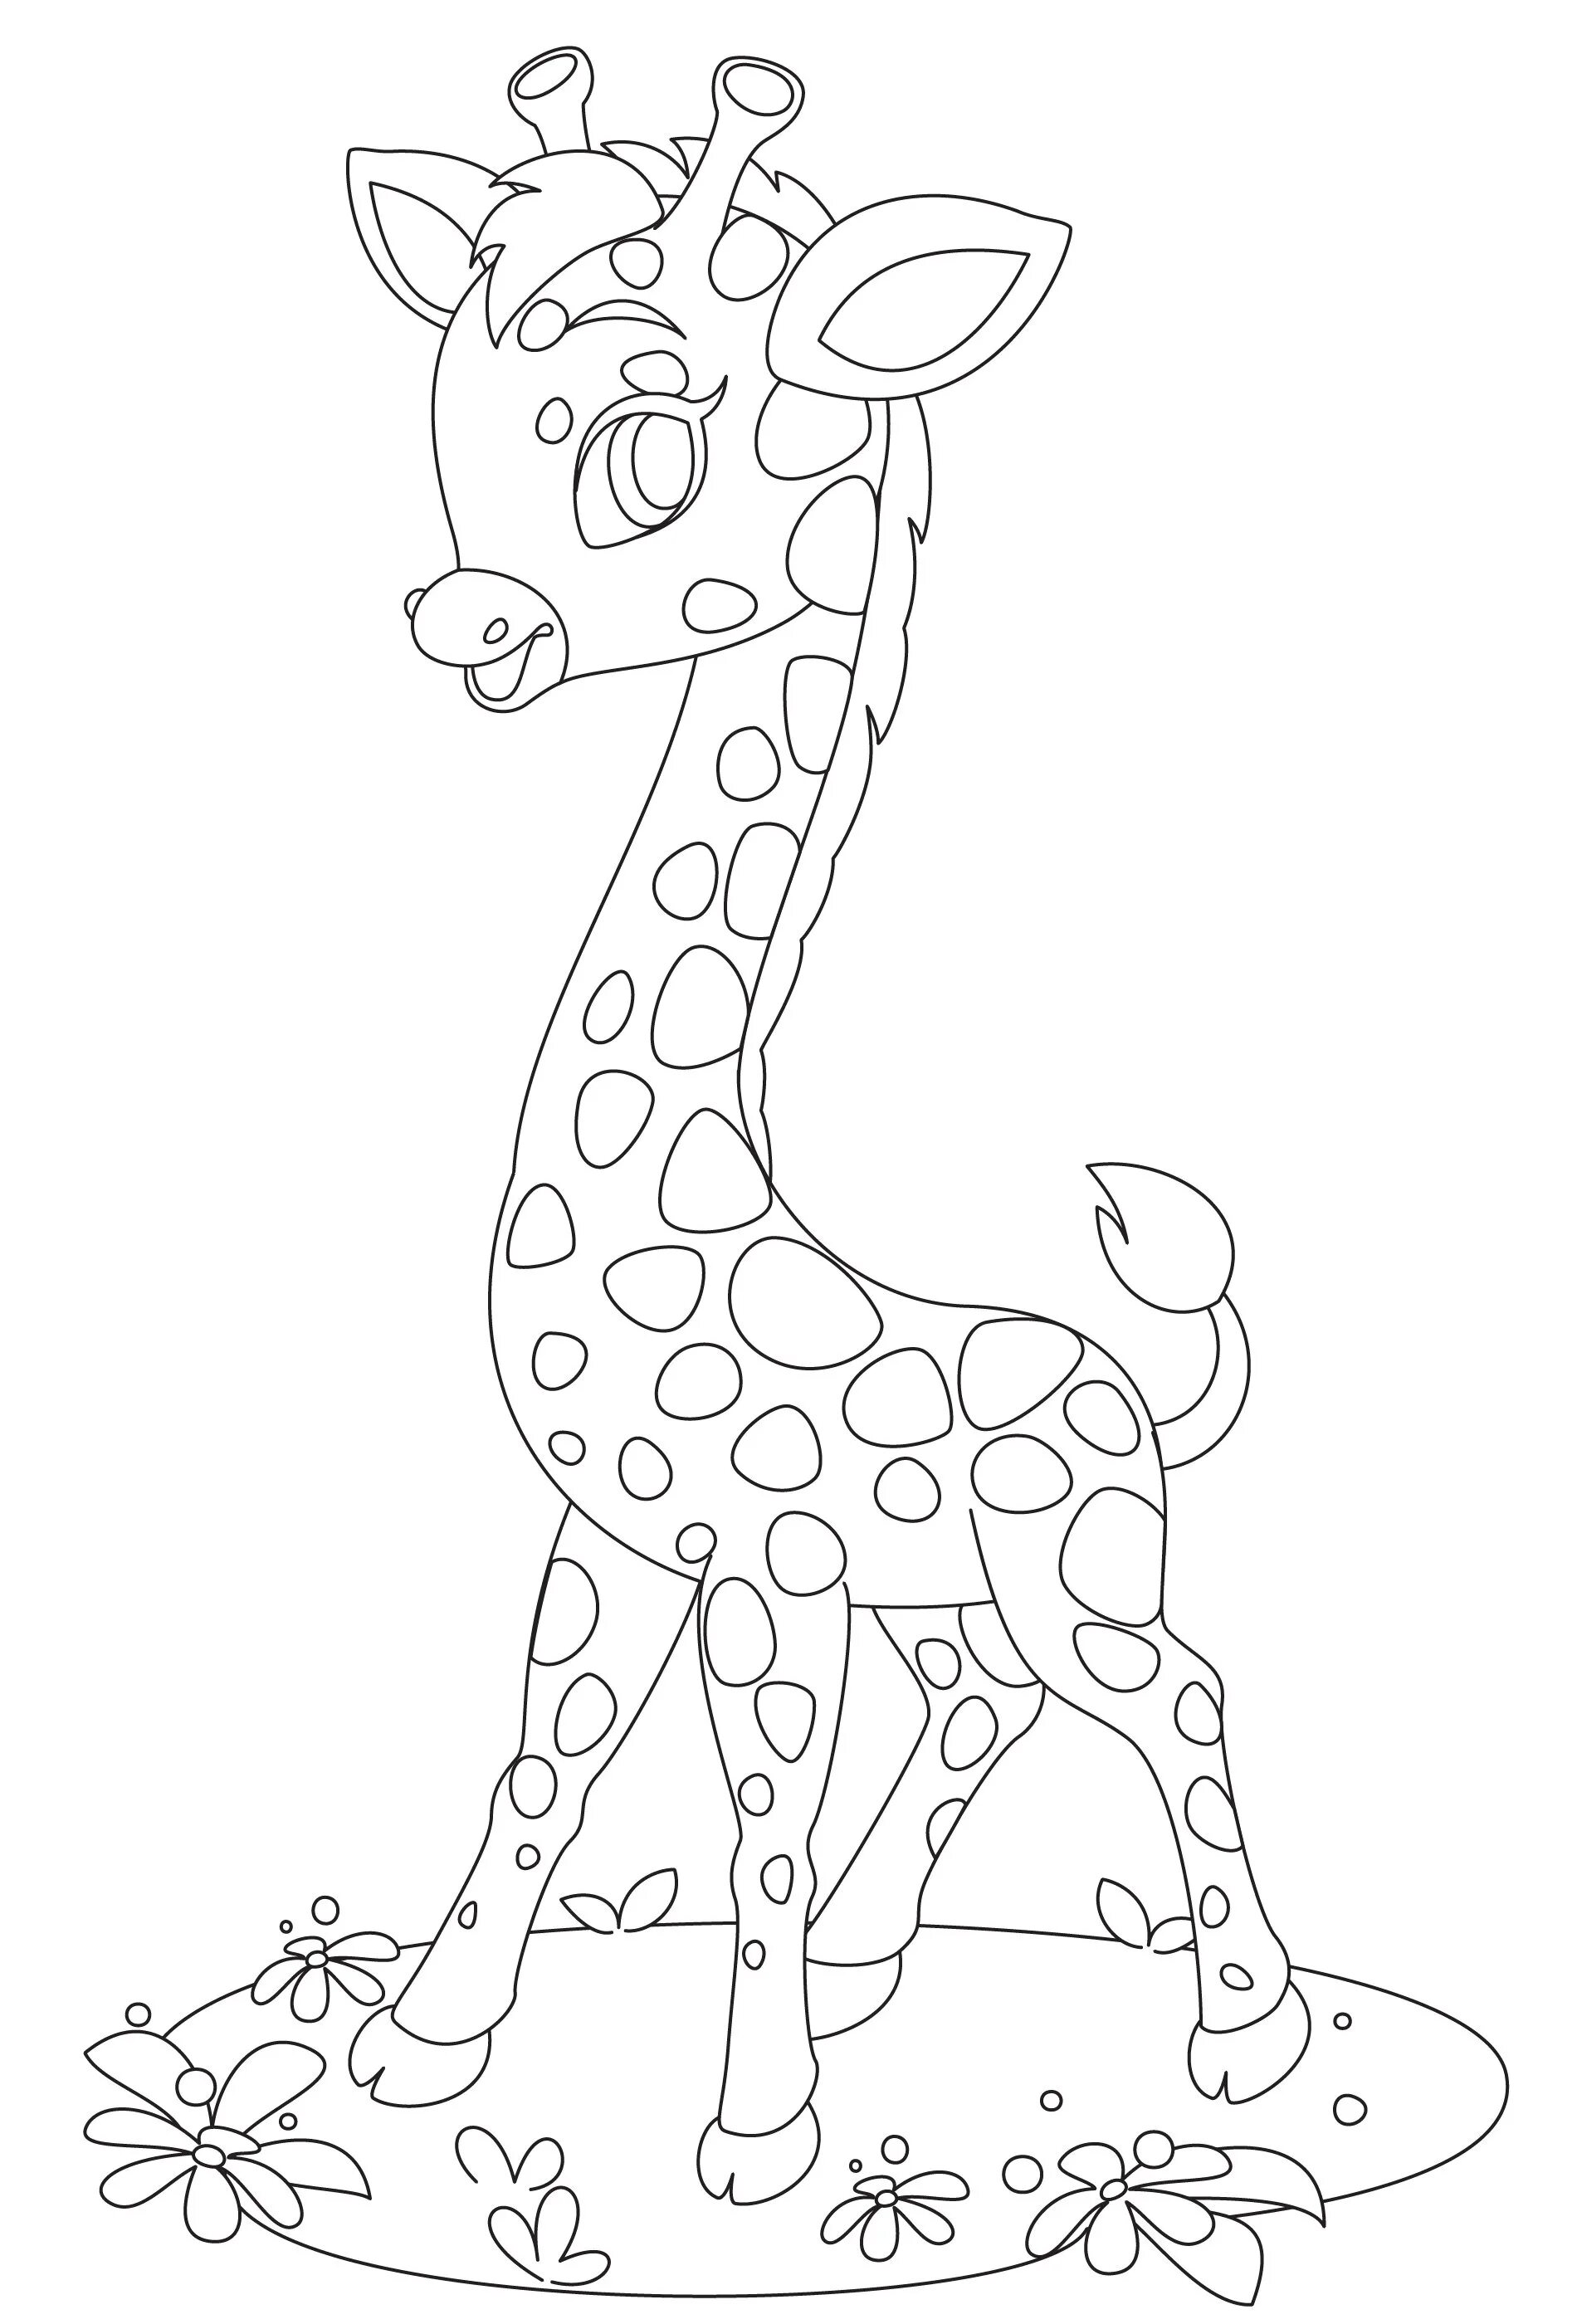 Coloring book with a giraffe for children 6-7 years old